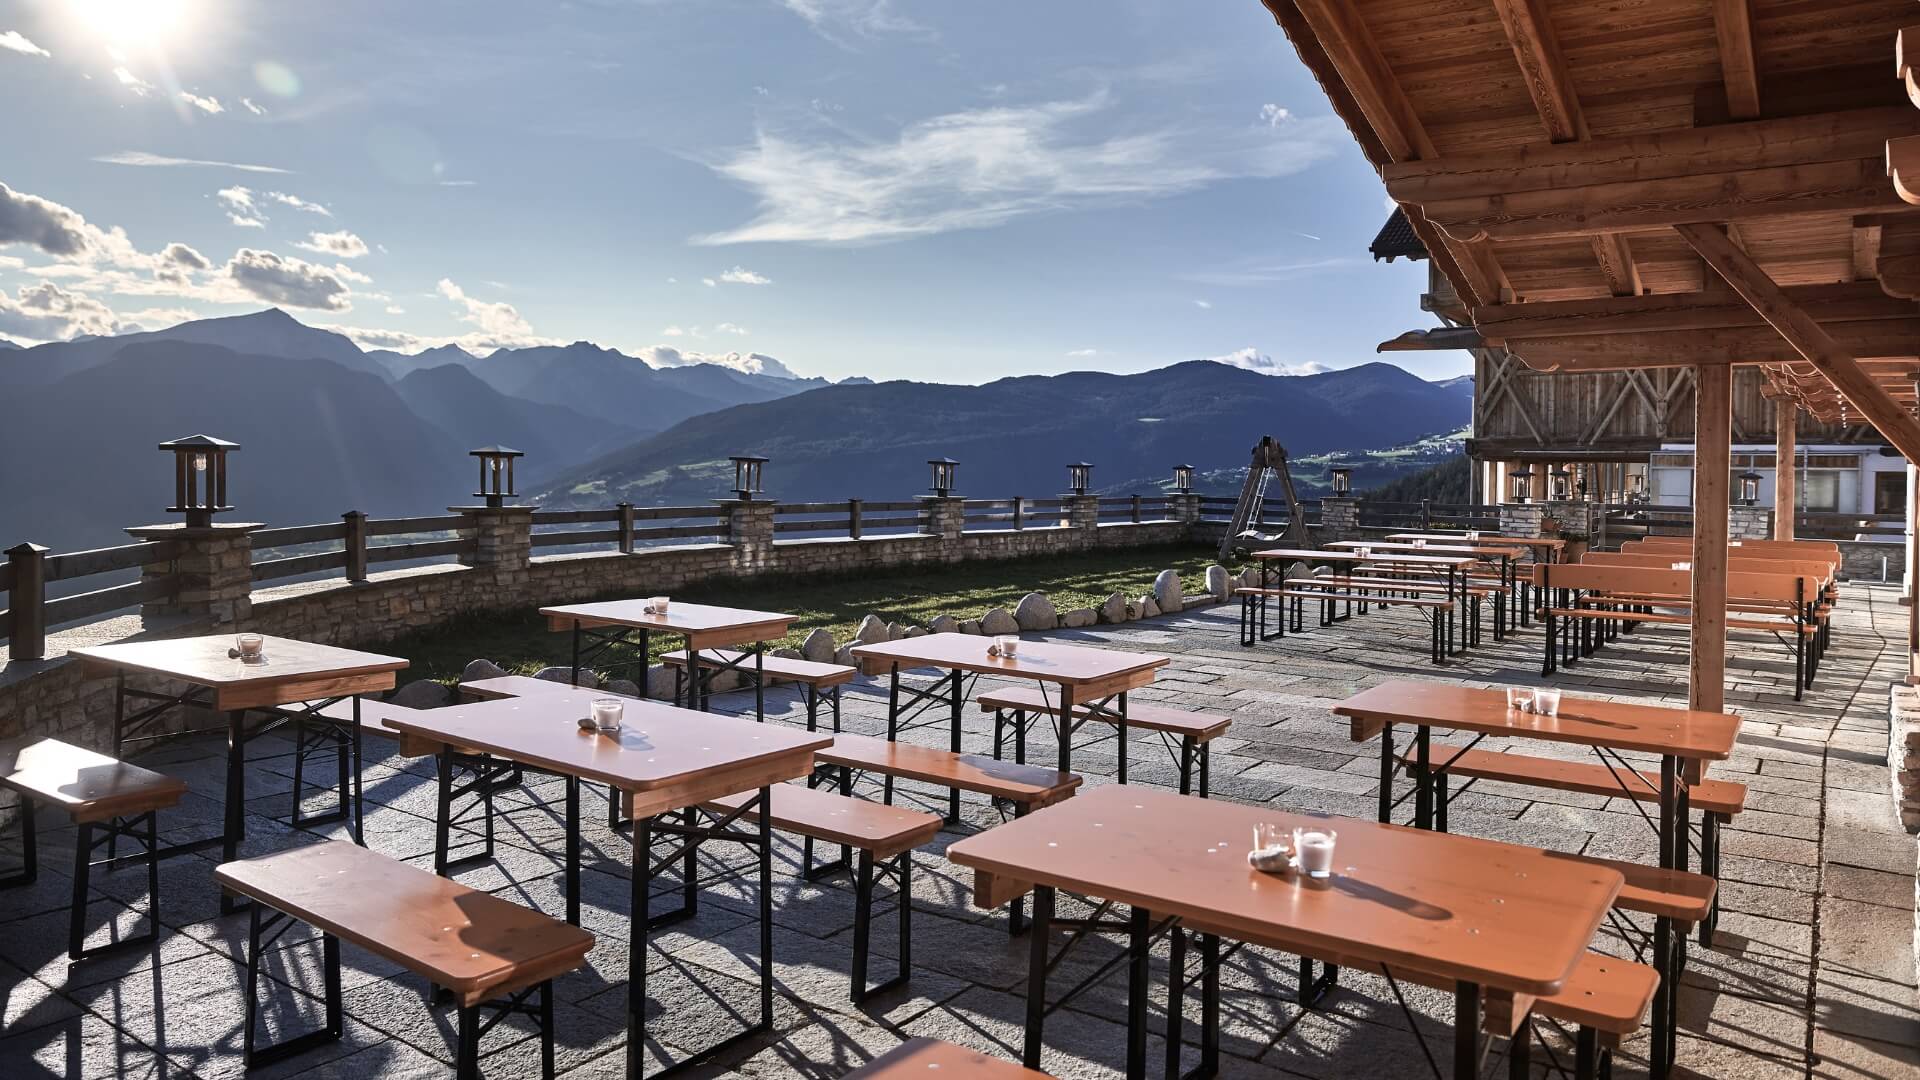 The Ahner Berghof has set up small beer garden table sets on the terrace.